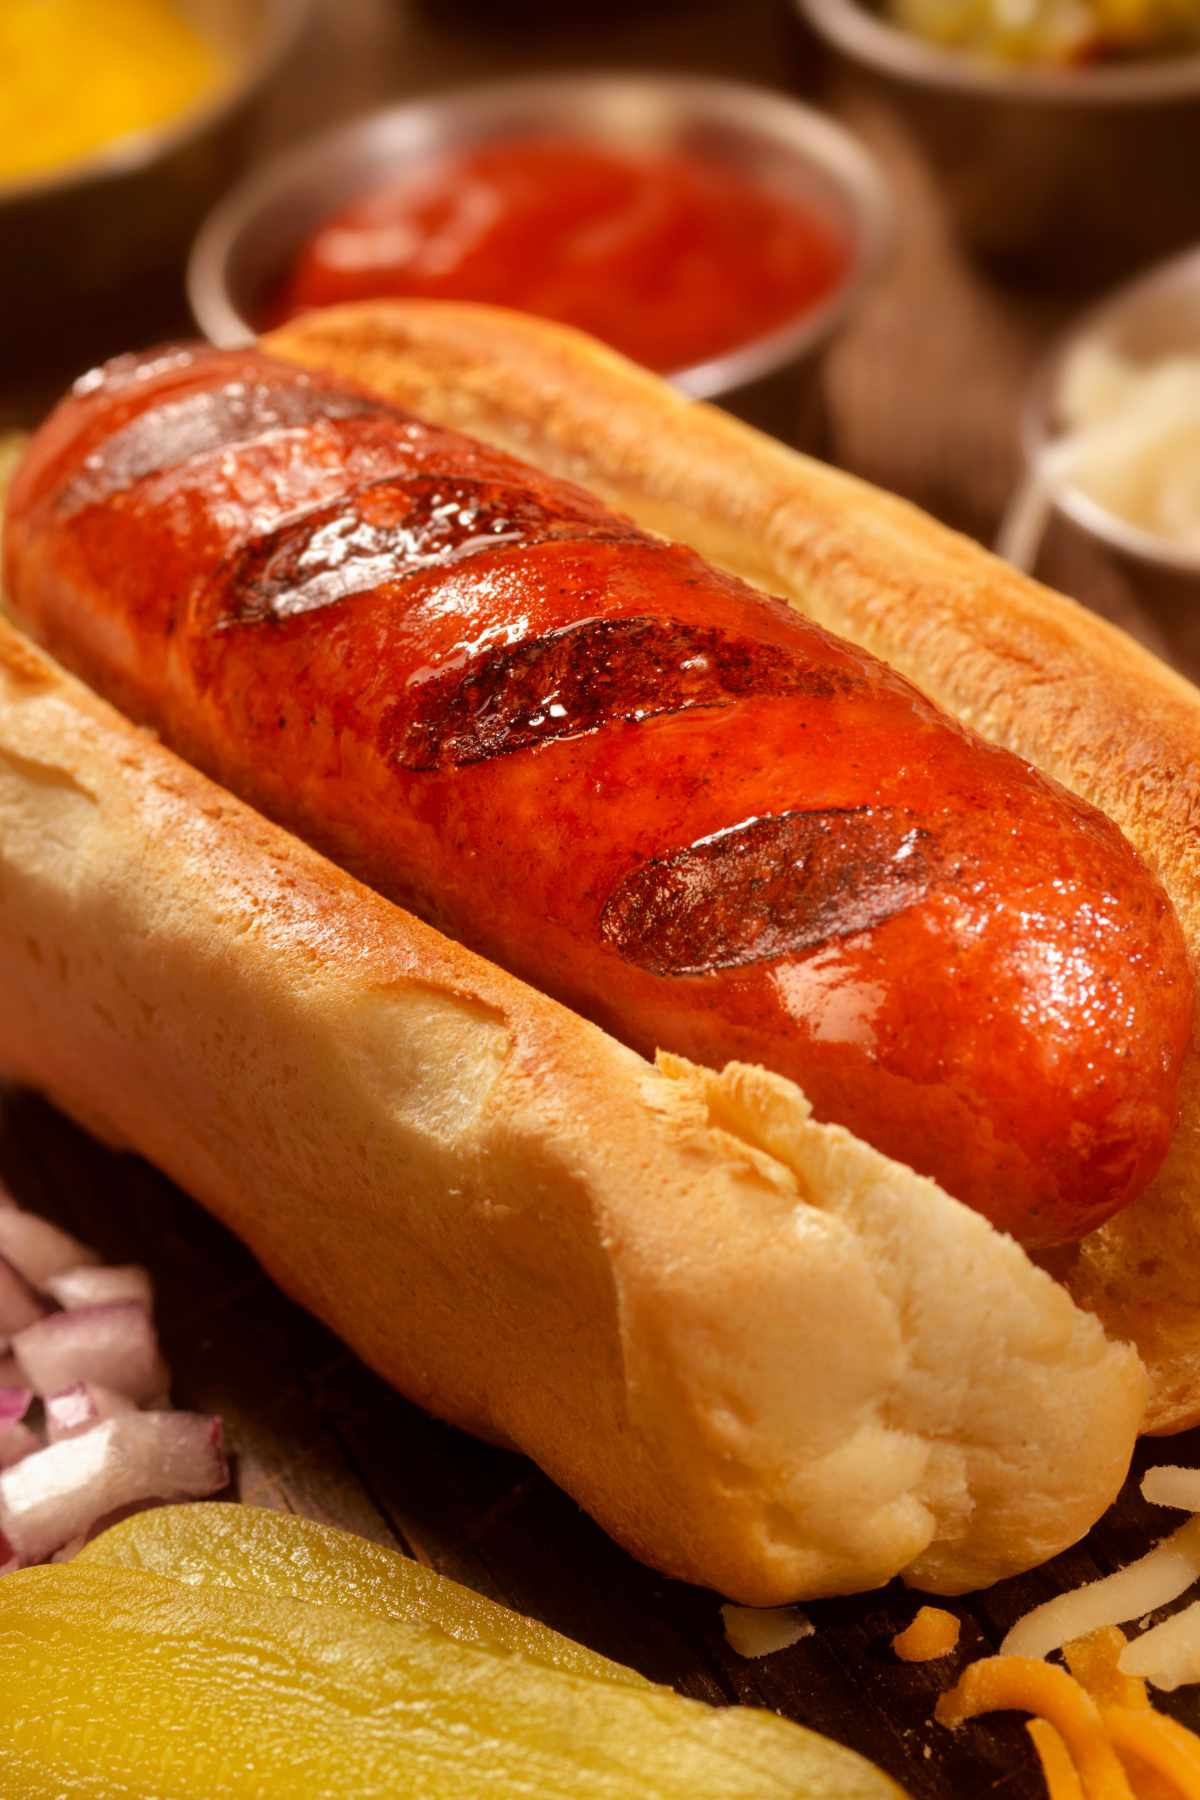 Everyone loves hot dogs. They’re a quick and easy meal for lunches, dinners and parties. However, if you are on a ketogenic diet, you may wonder, are hot dogs keto-friendly? In this post, we will explore the carb content of hot dogs and share with you a keto-friendly hot dog recipe to make at home.